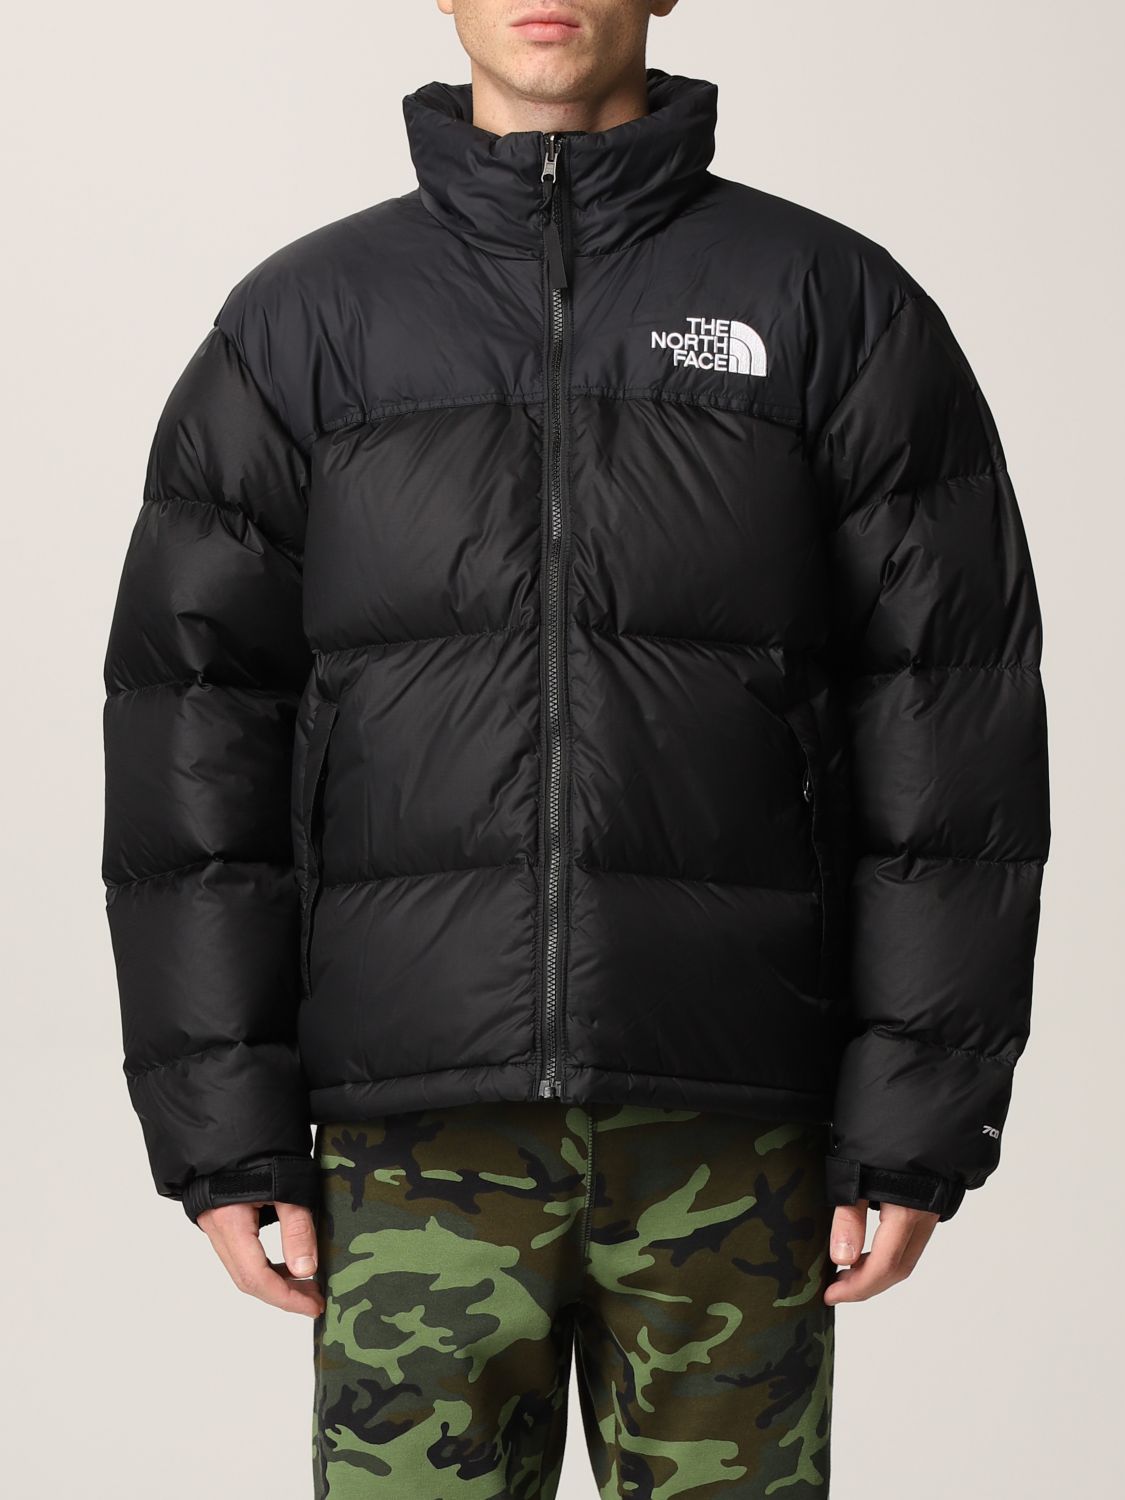 THE NORTH FACE: jacket for man - Black | The North Face jacket ...